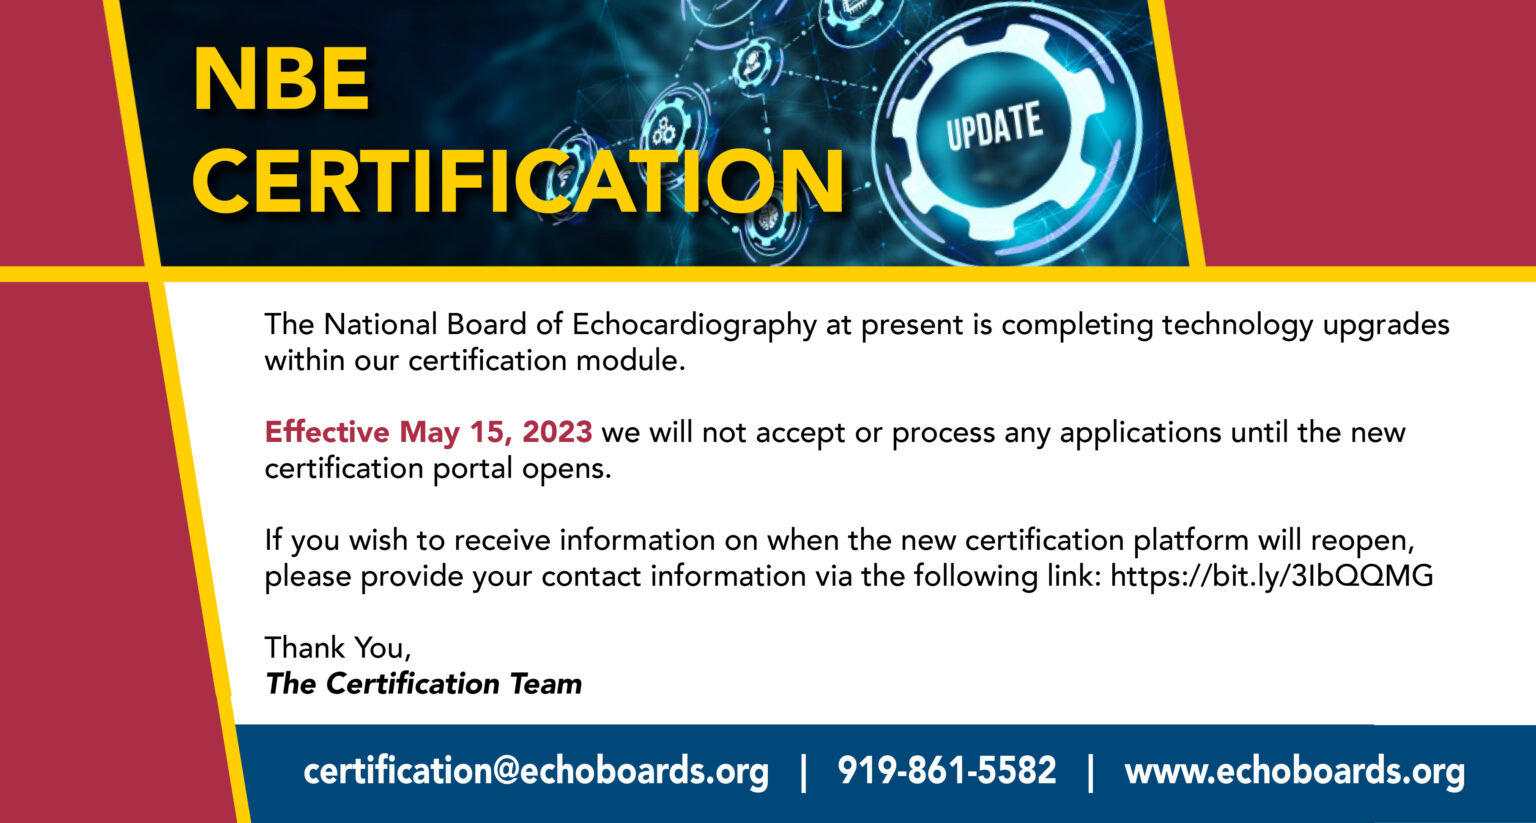 NBE Certification Update National Board of Echocardiography, Inc.